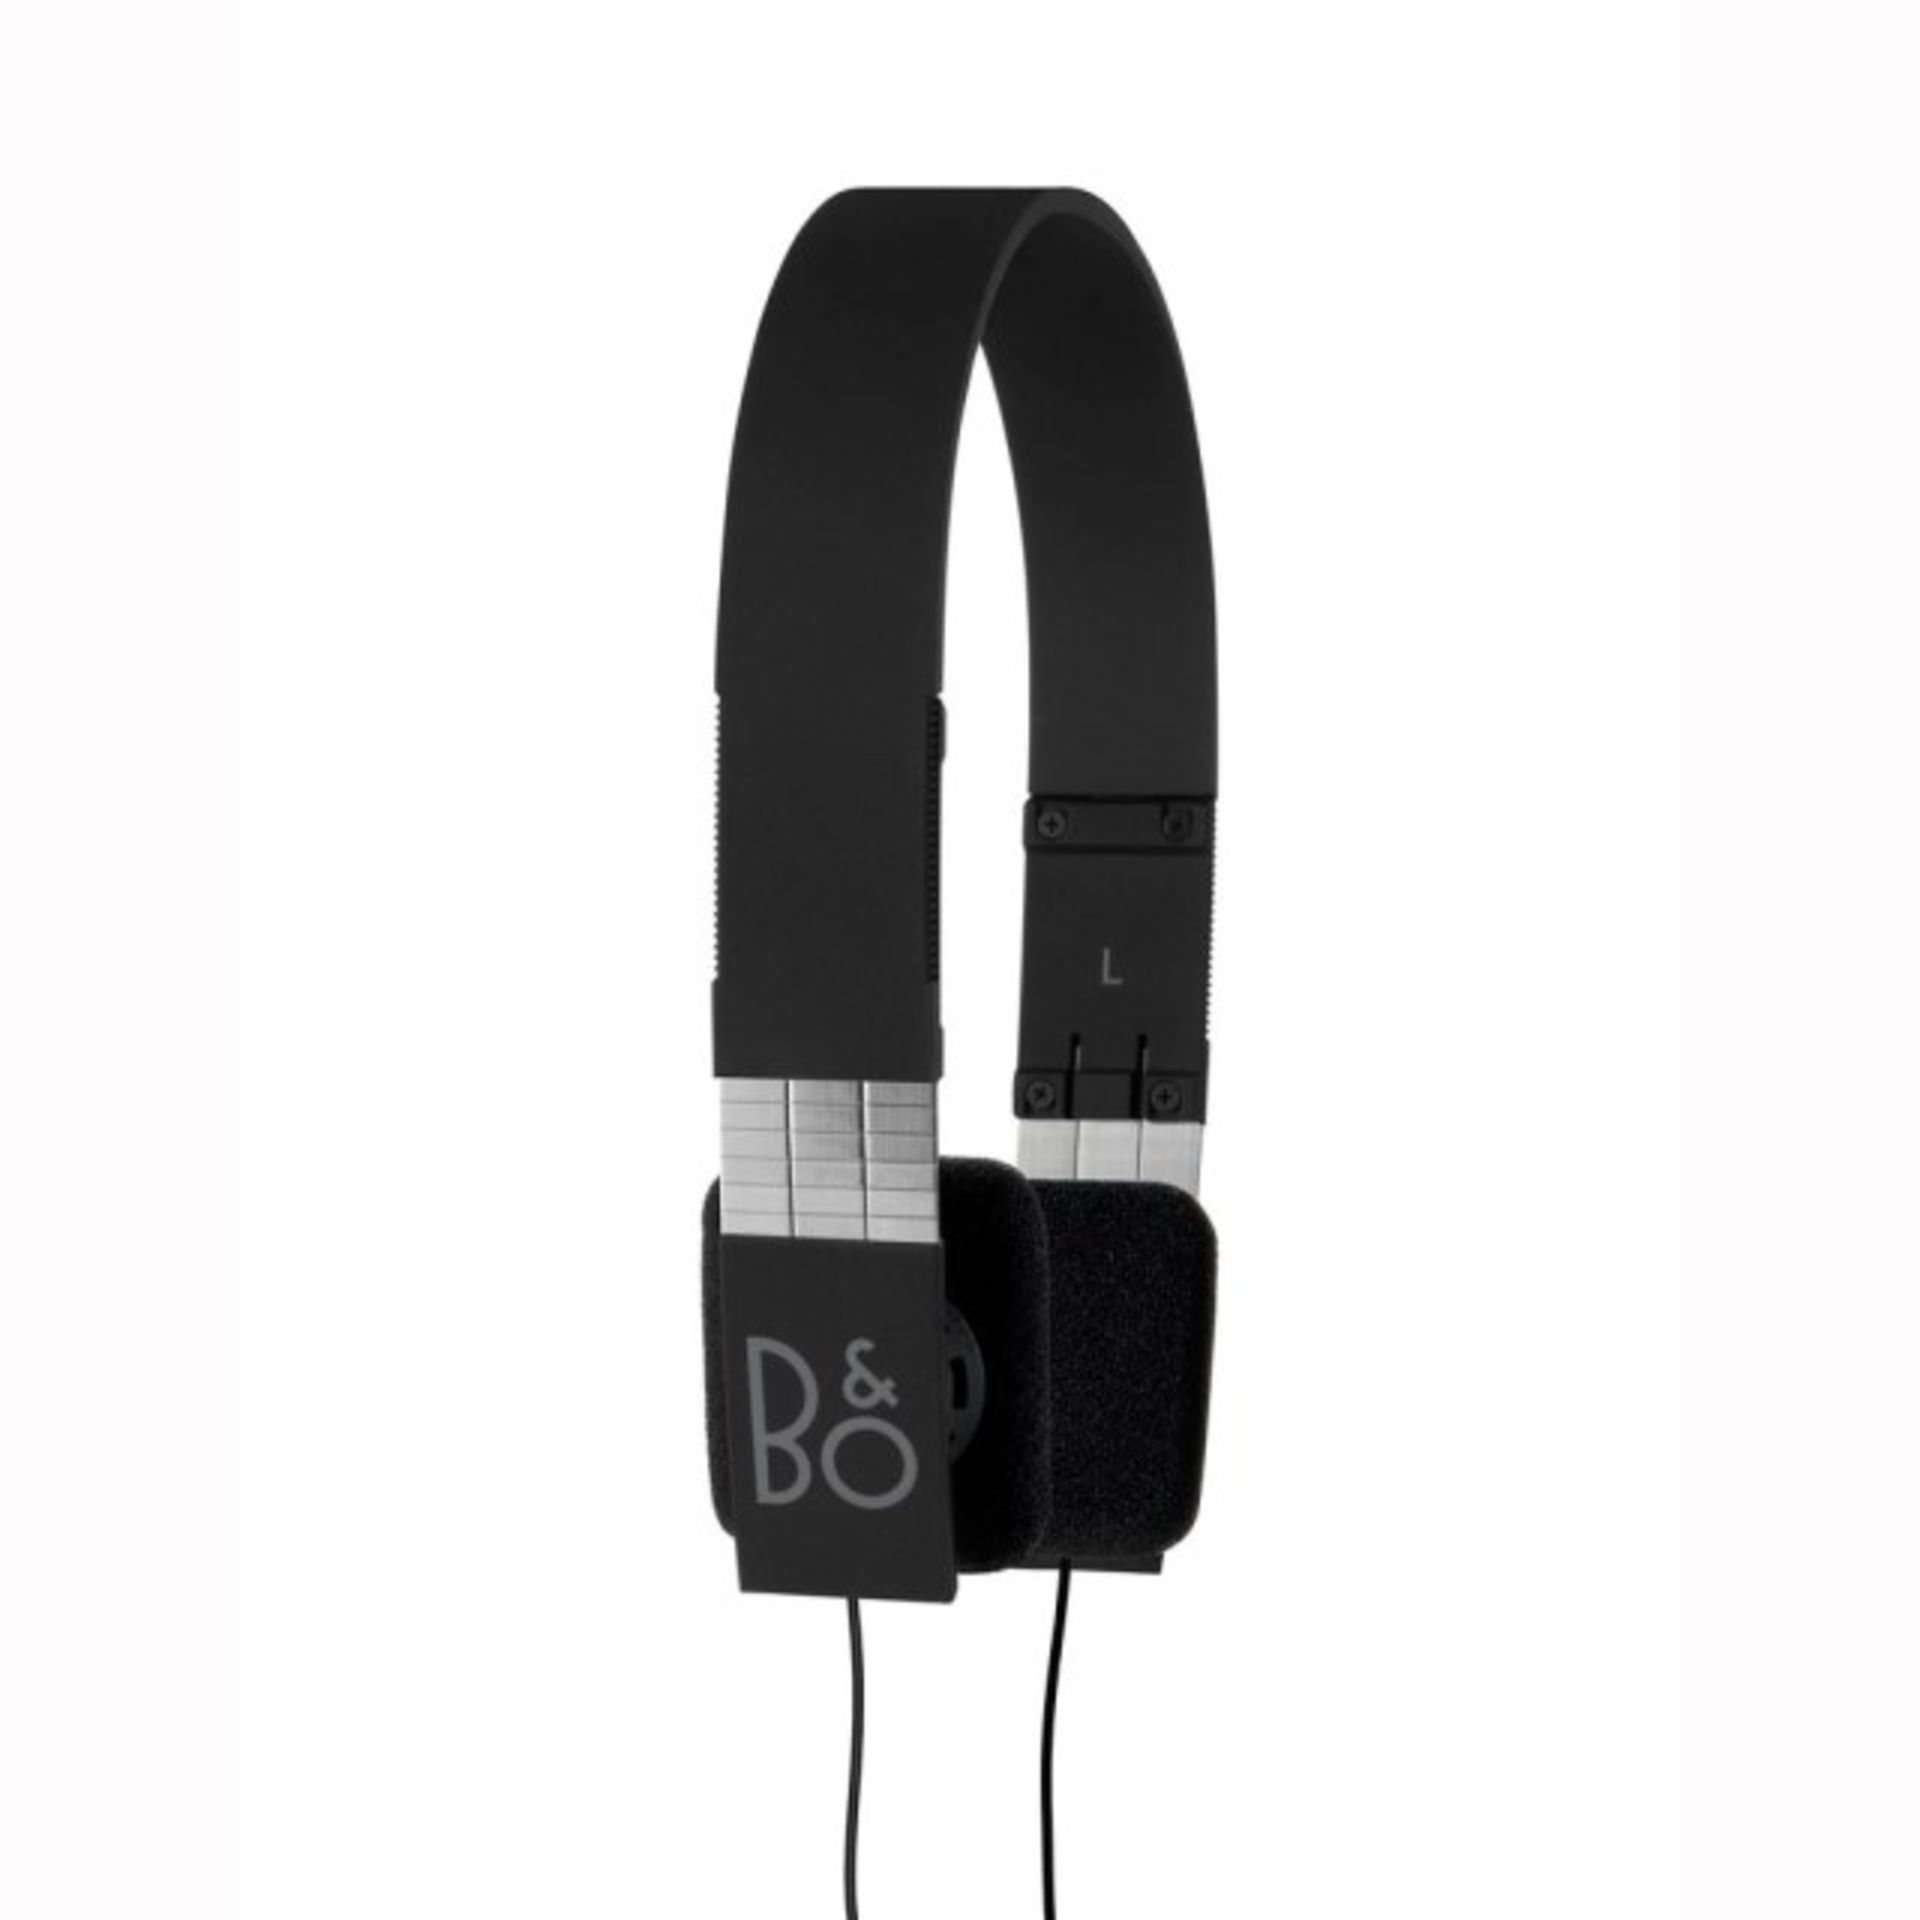 V Brand New Bang & Olufsen Form 2i Headphones With Inline Remote/Microphone - Ultra Light and